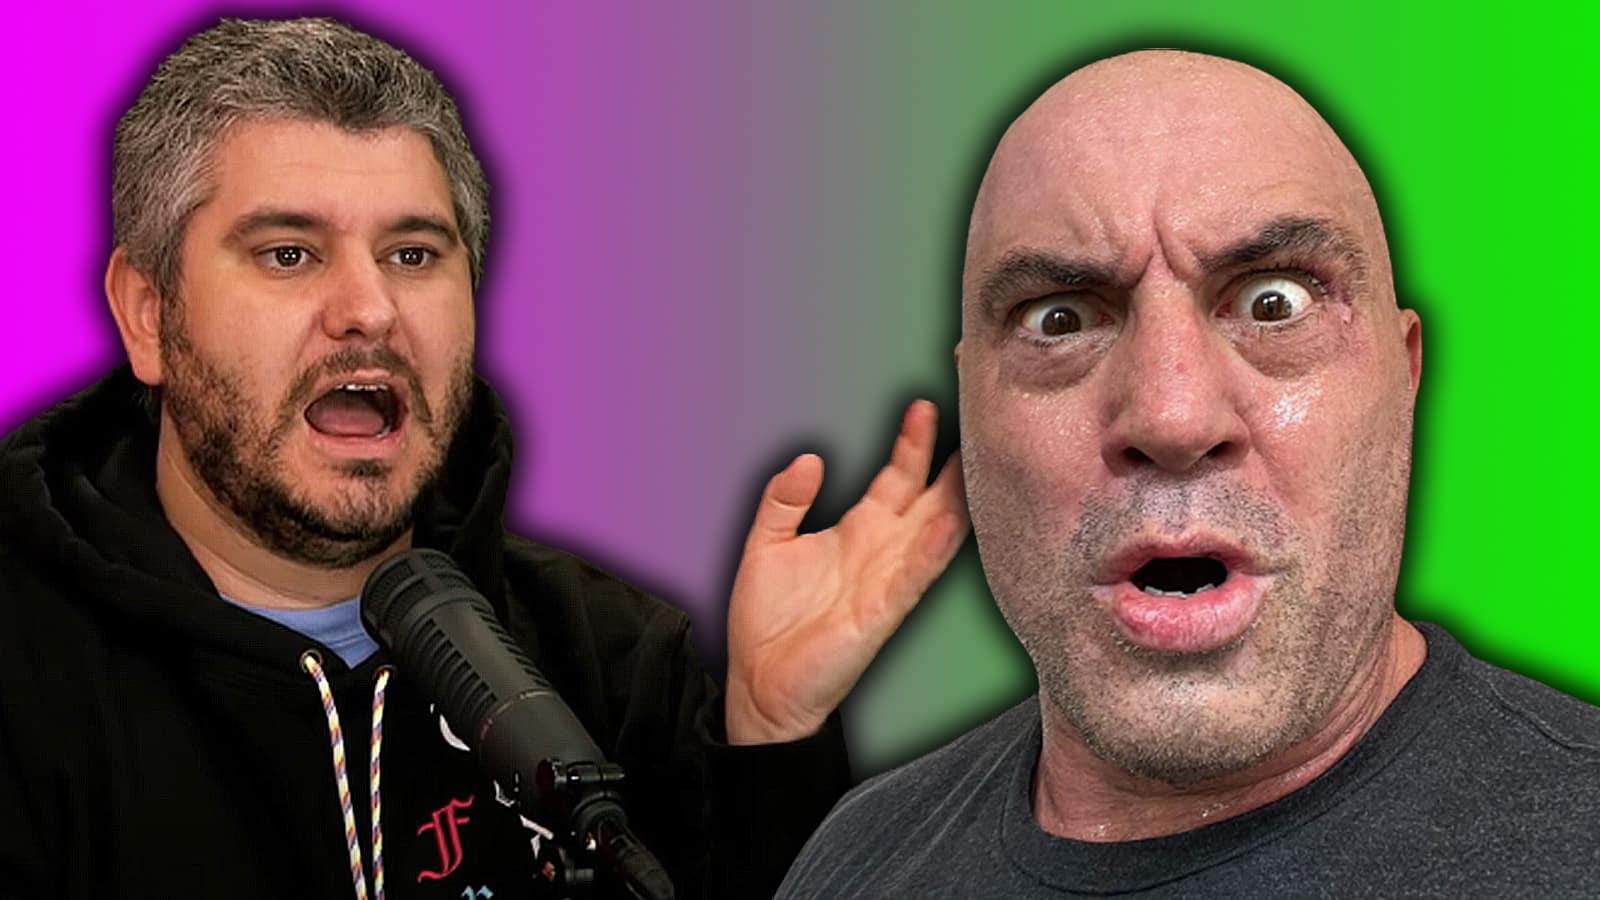 Ethan Klein calls out Joe Rogan over health comments